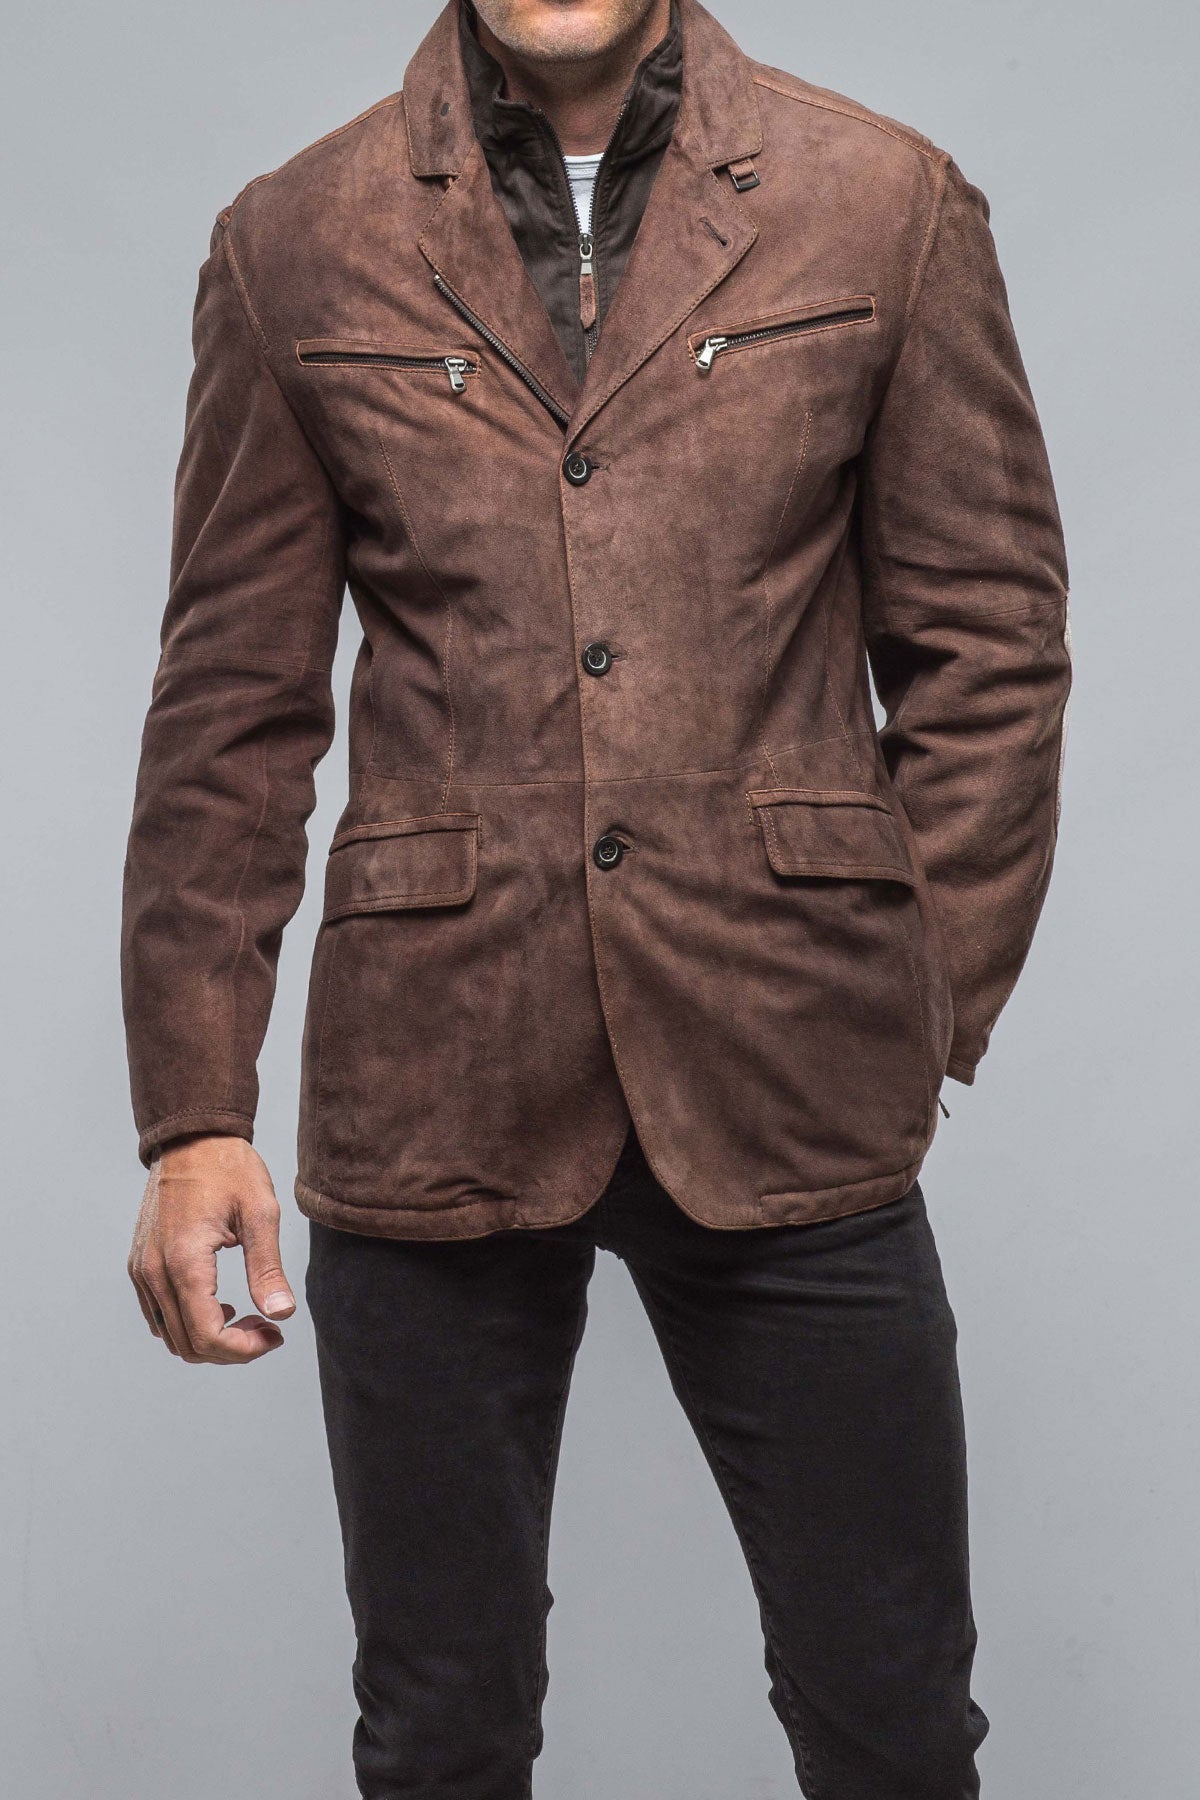 Soft Caramel Brown Suede Leather Blazer - #712 : LeatherCult: Genuine  Custom Leather Products, Jackets for Men & Women